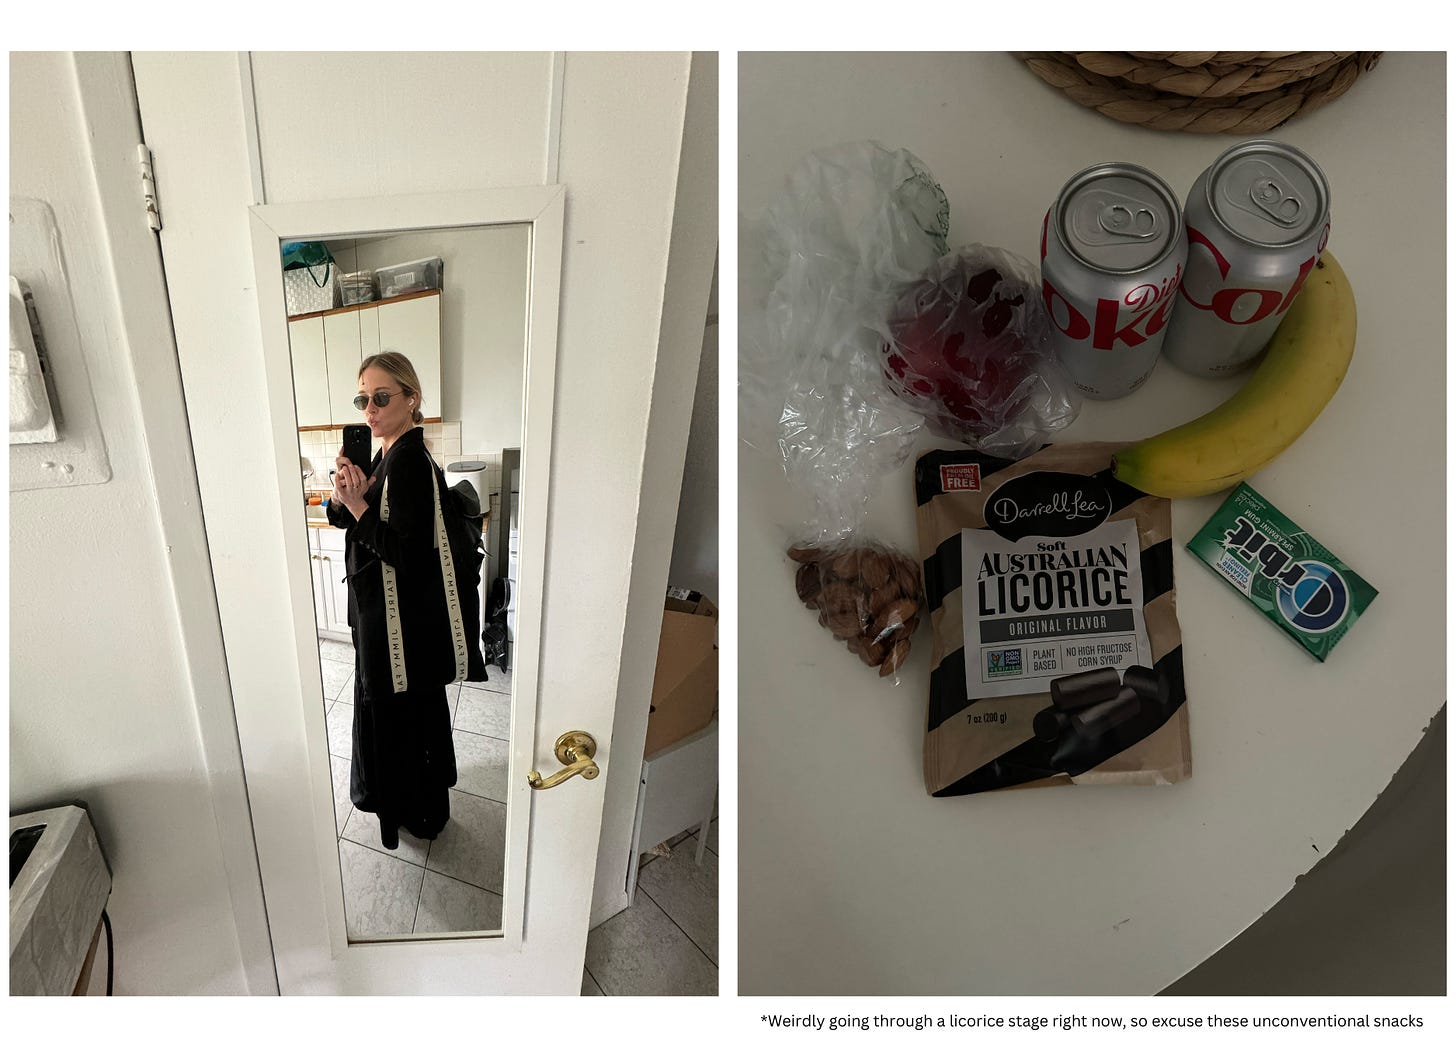 Photo of Katie in mirror and photo of snacks which include Orbit gum, banana, licorice, almonds and diet coke